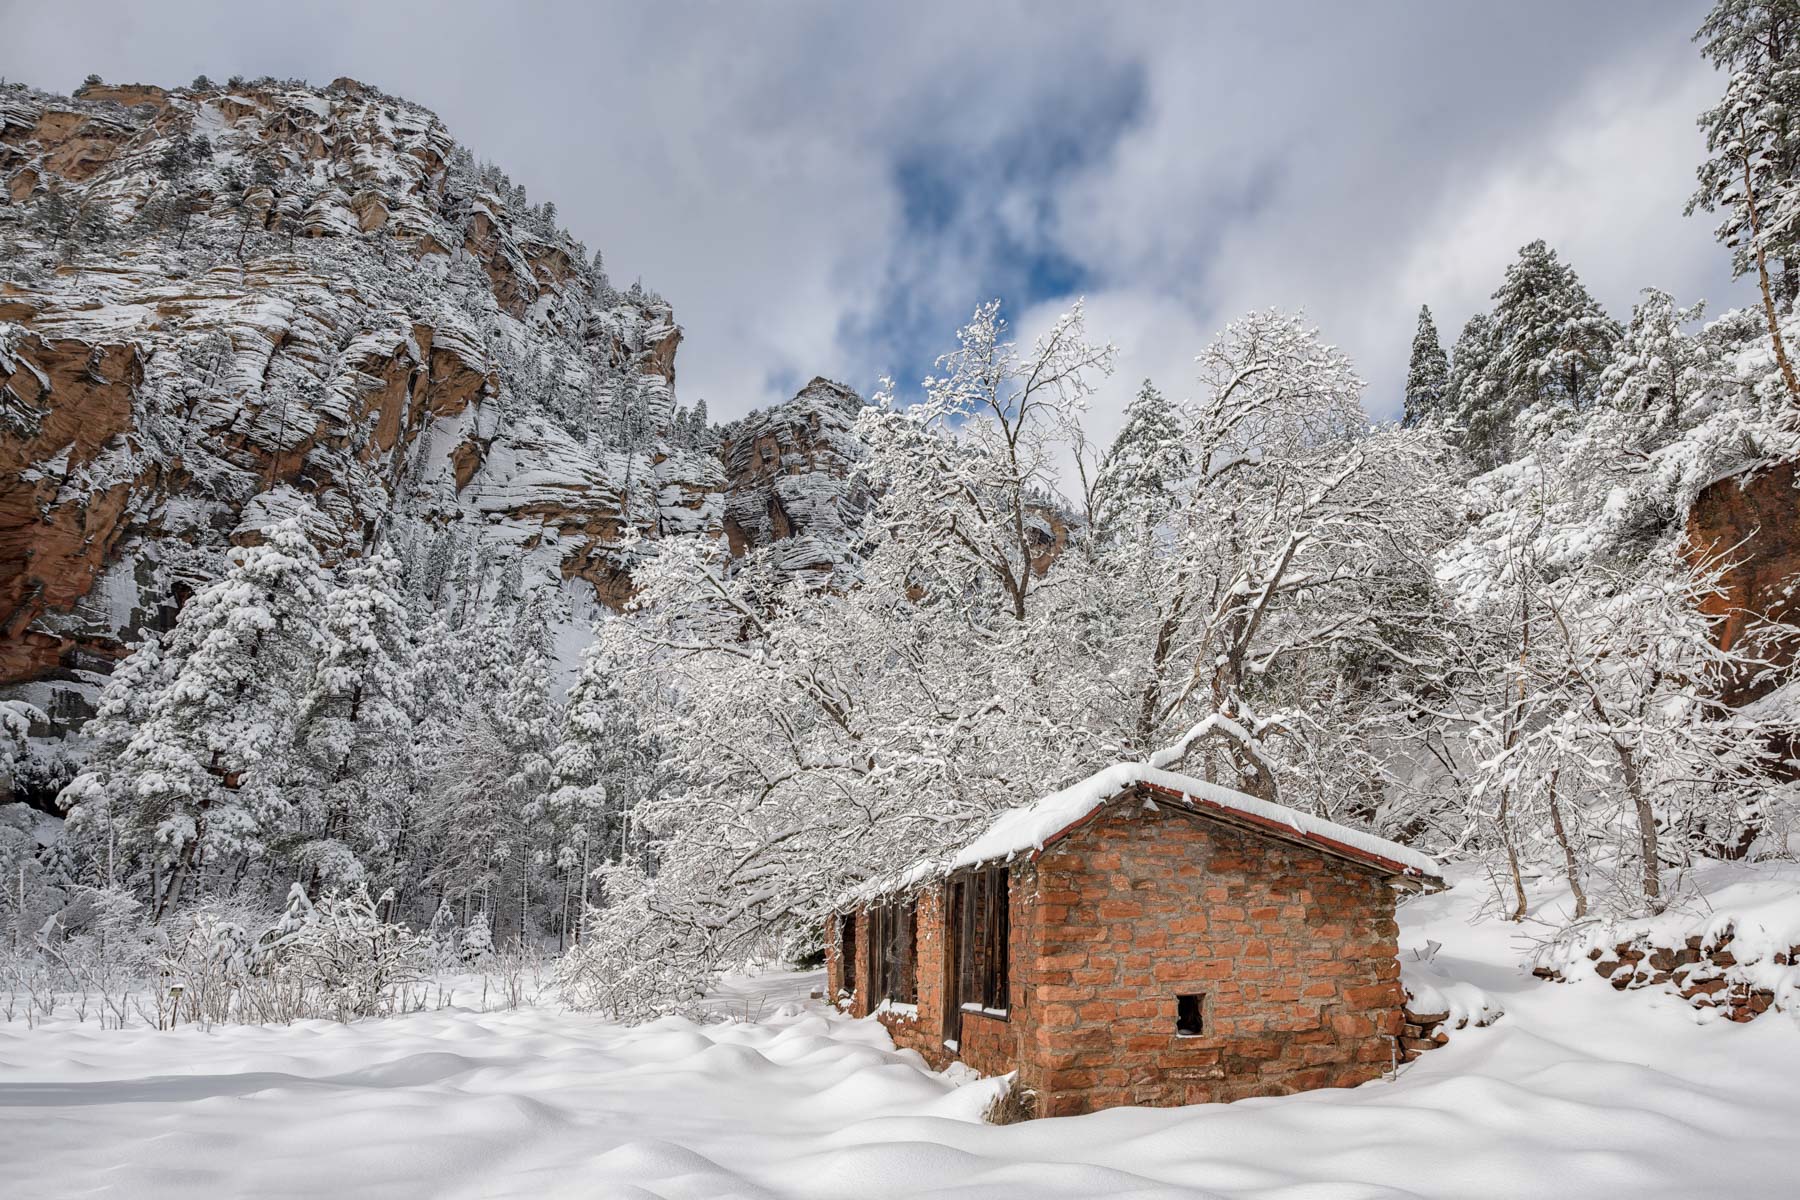 Remnant of Mayhew Lodge near the West Fork of Oak Creek trailhead covered in snow